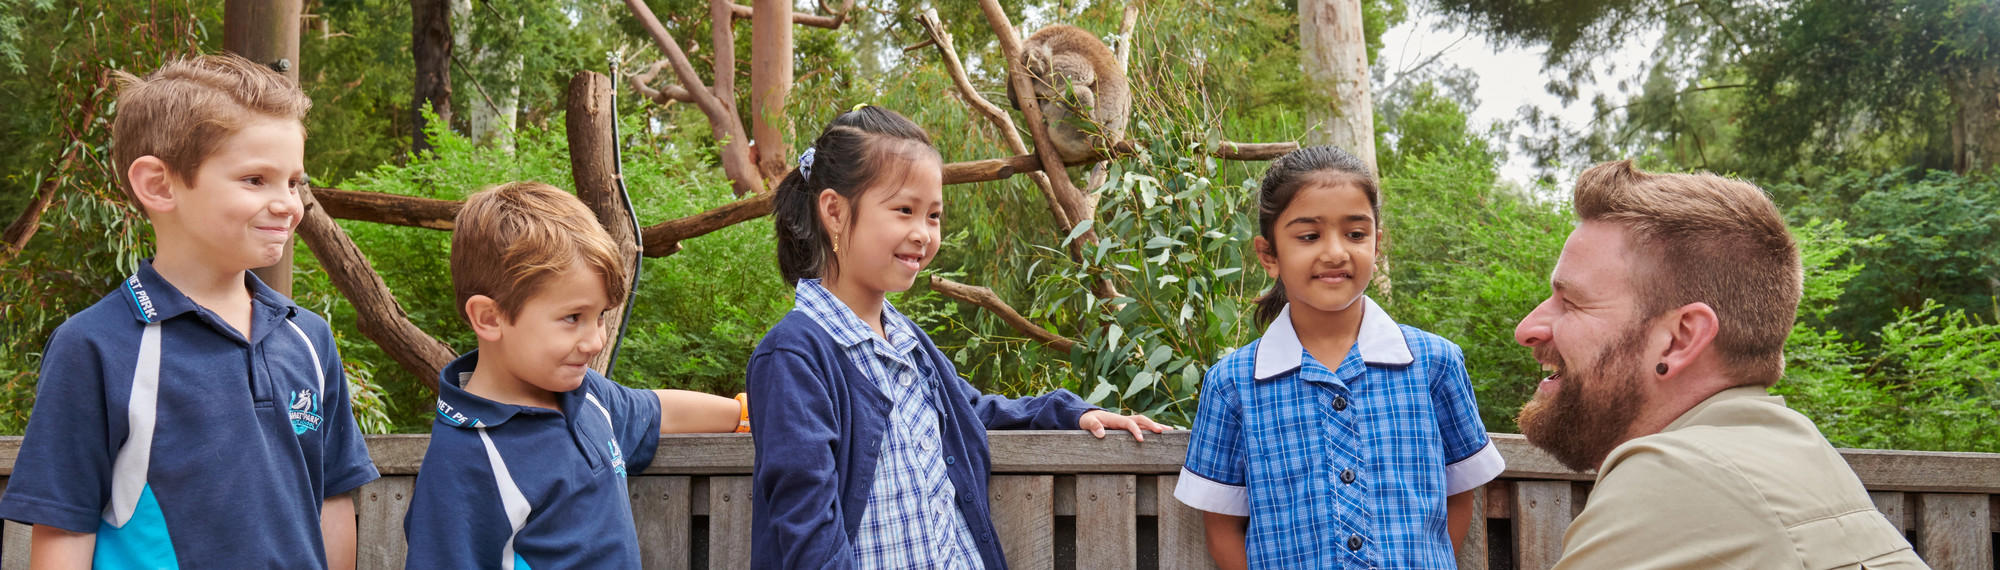 Four young school students in uniform smile at a zoo staff member who is crouched down in front of a koala exhibit